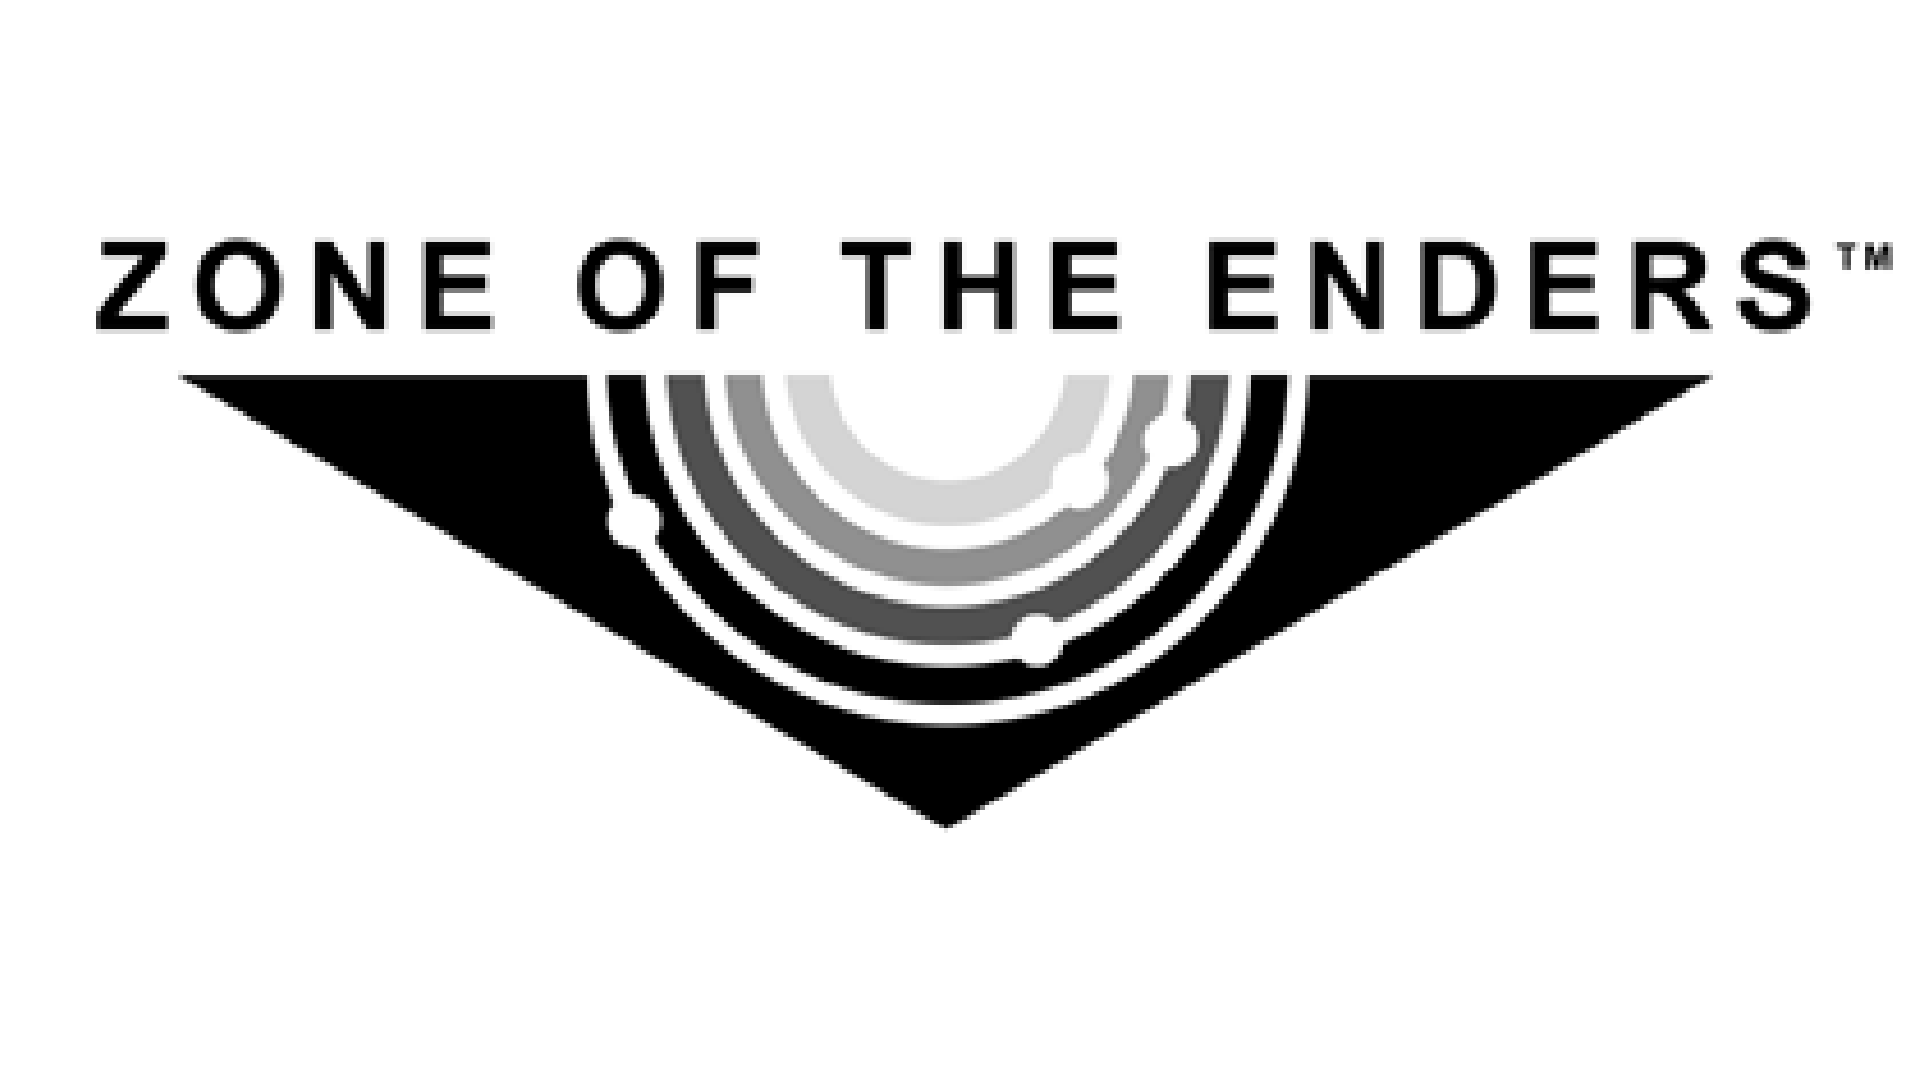 Zone of the Enders Logo